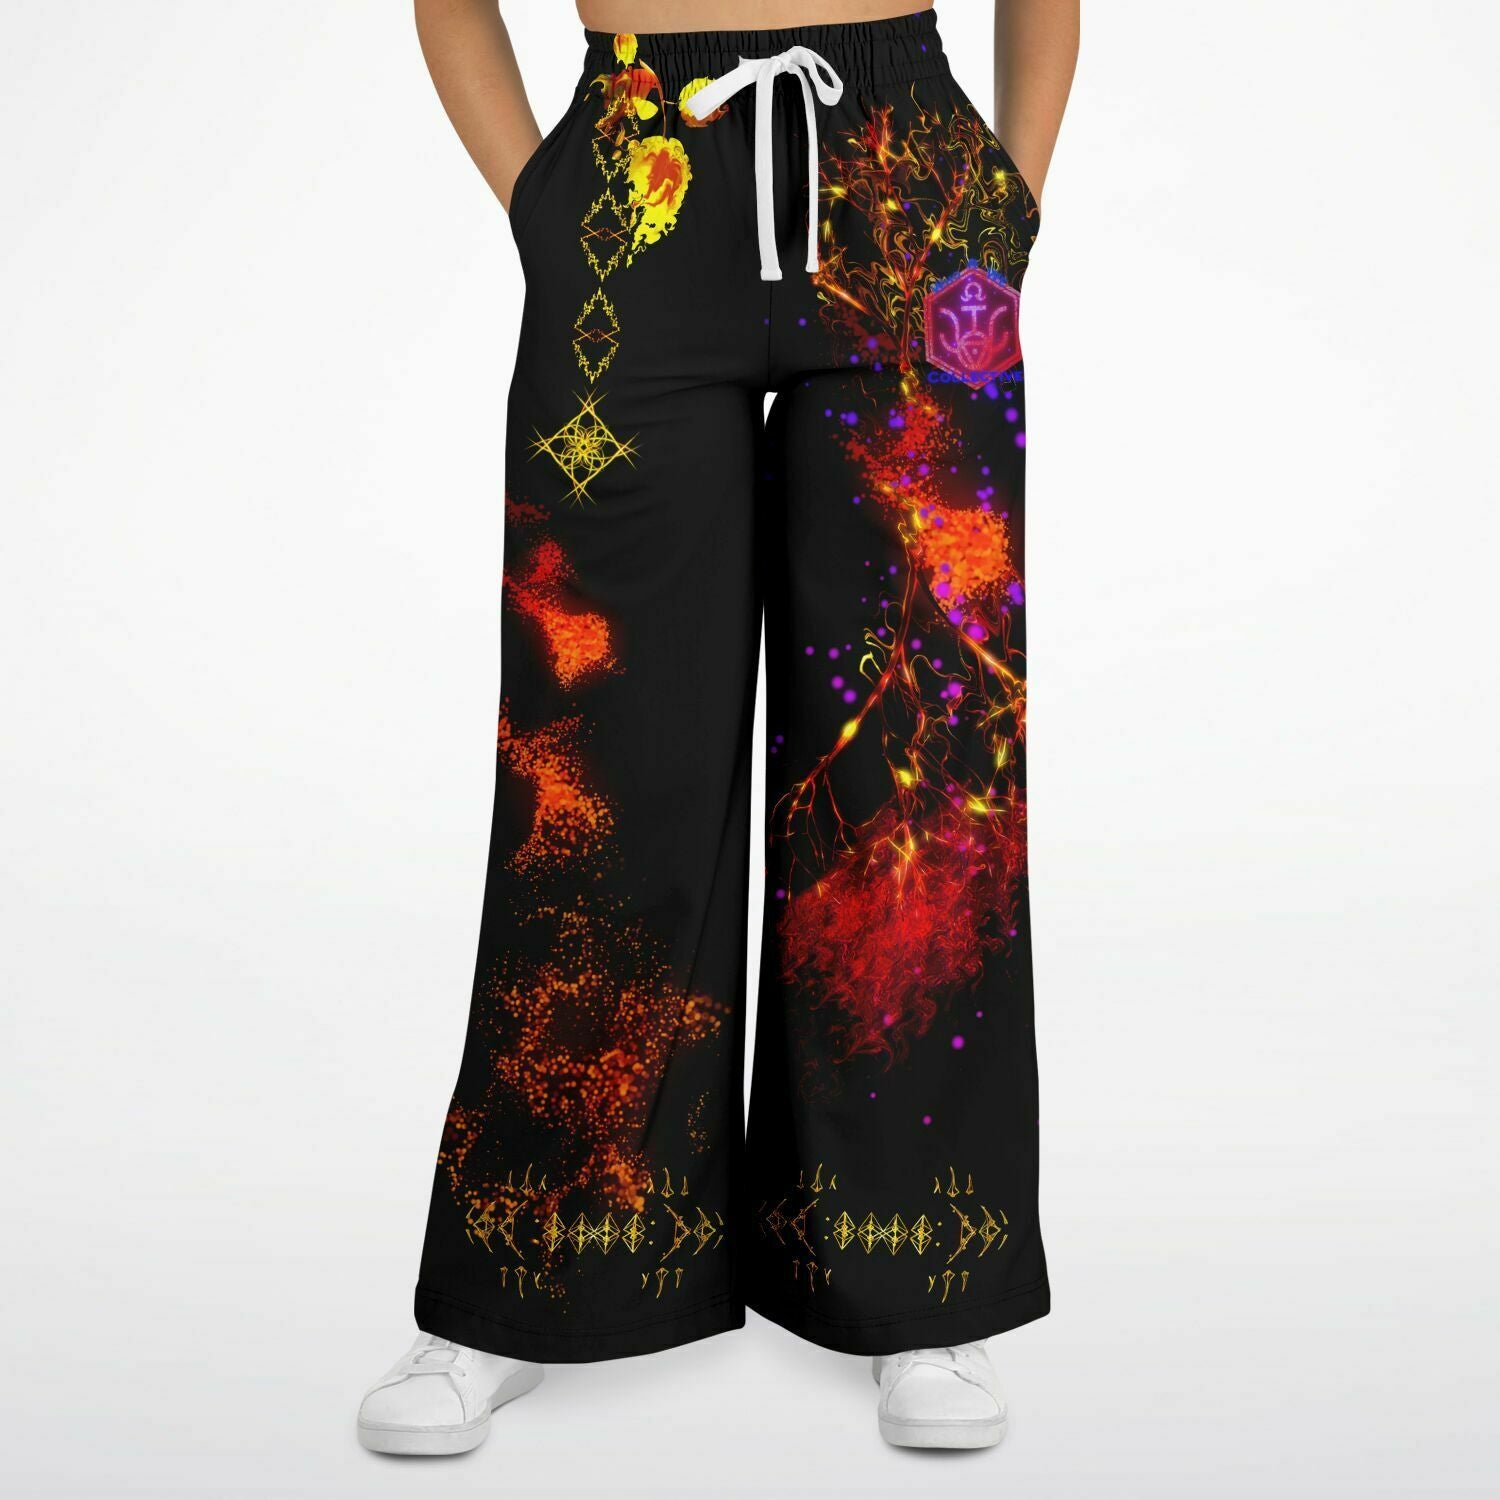 Taiga-Zoku (Prototype Line) " Neo Amber Motion " Flowpants - Who R We Collective